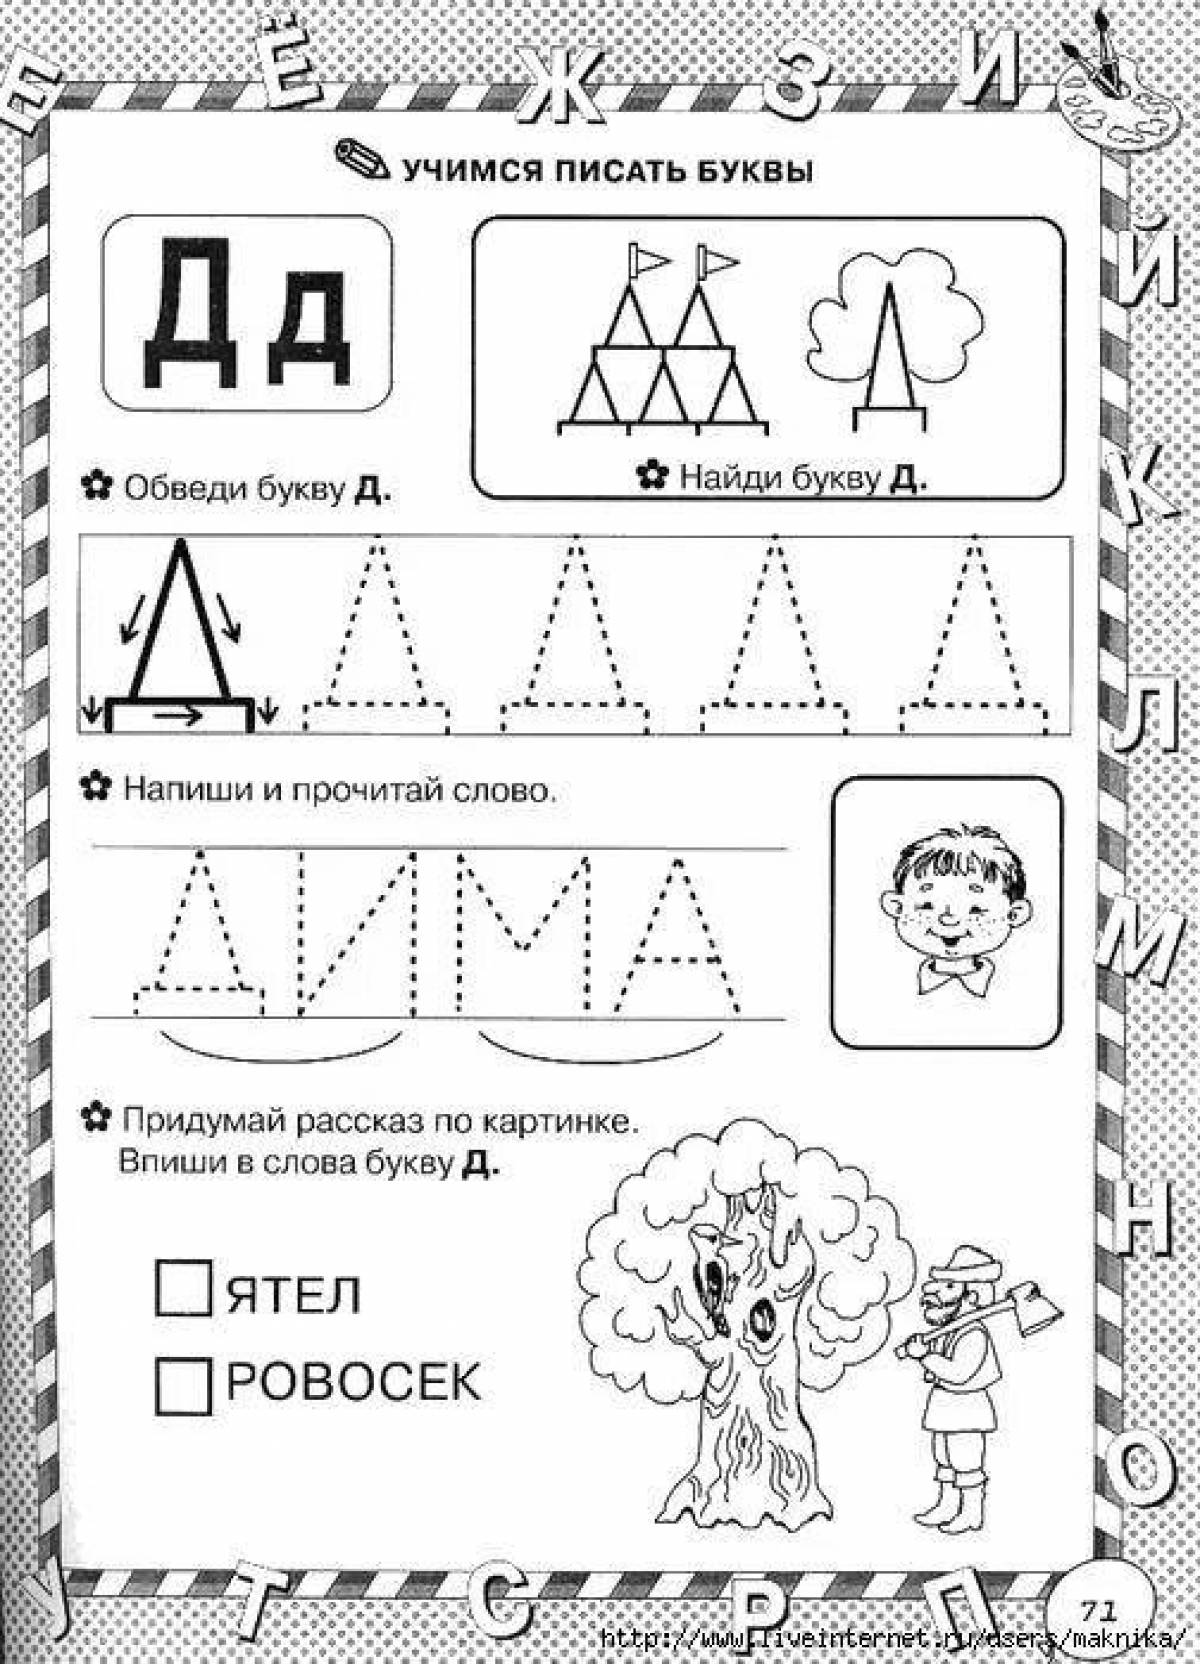 Creative letter d coloring book for kids